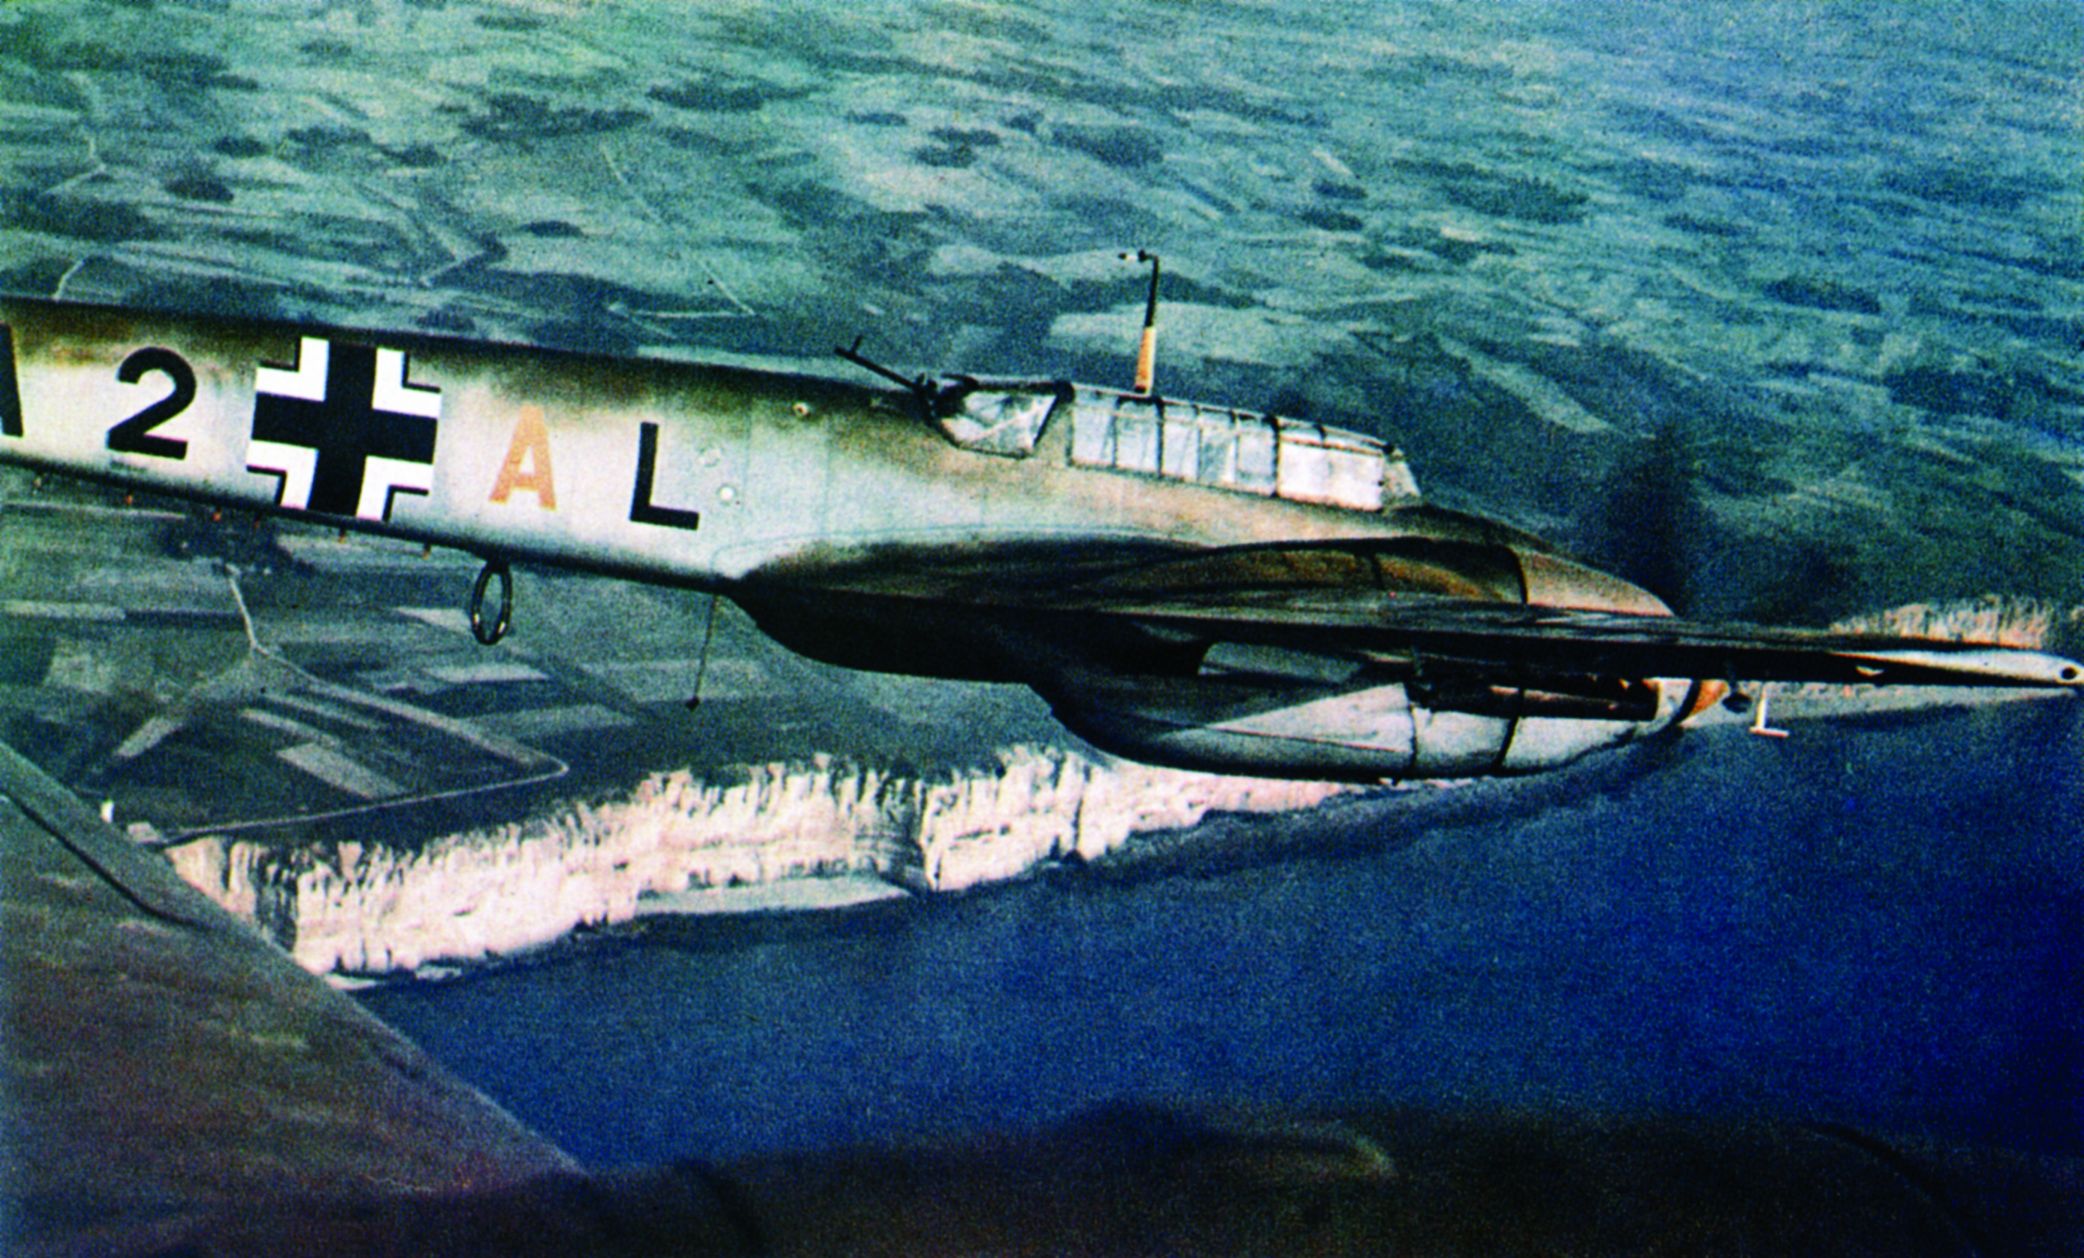 Flying above the famed white cliffs of Dover and the English Channel, a twin-engine Messerschmitt Me-110 of the Luftwaffe provides escort duty to German bombers.